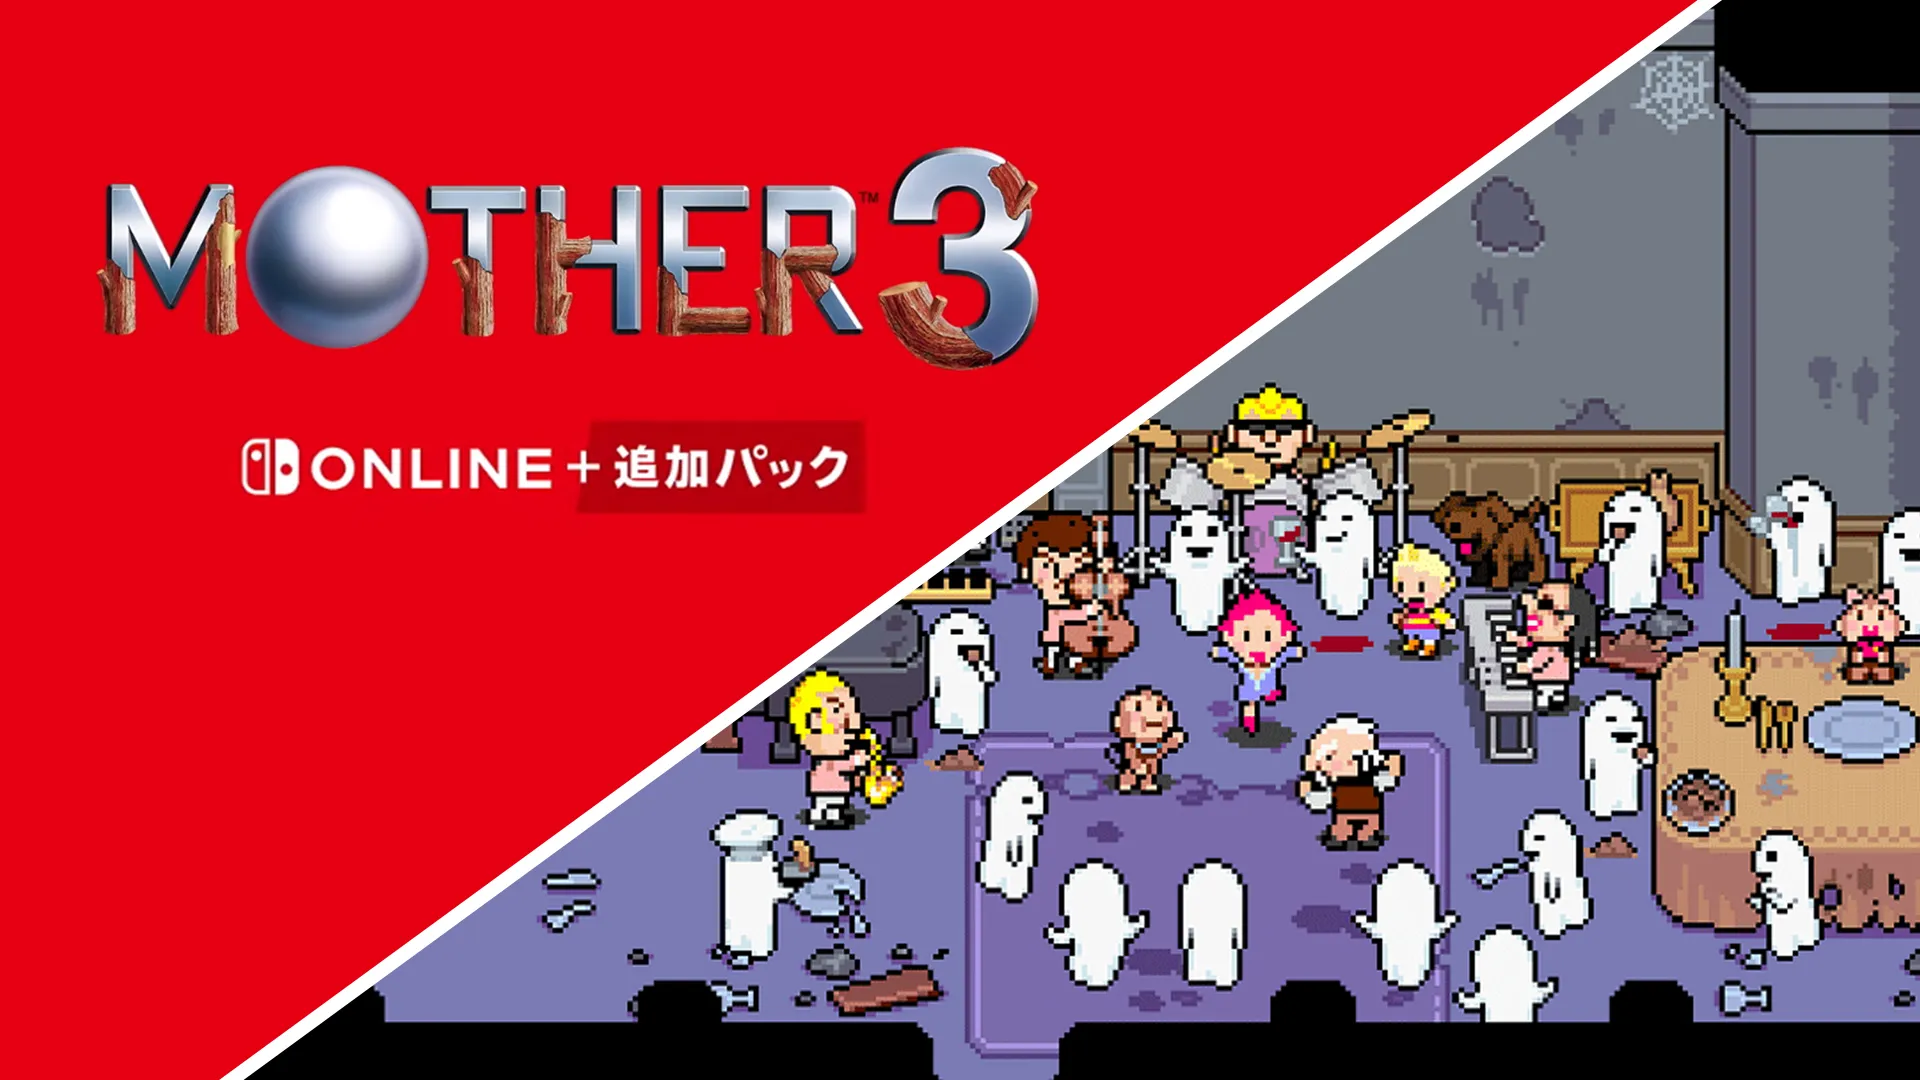 Mother 3 in Japanese Nintendo Switch Online